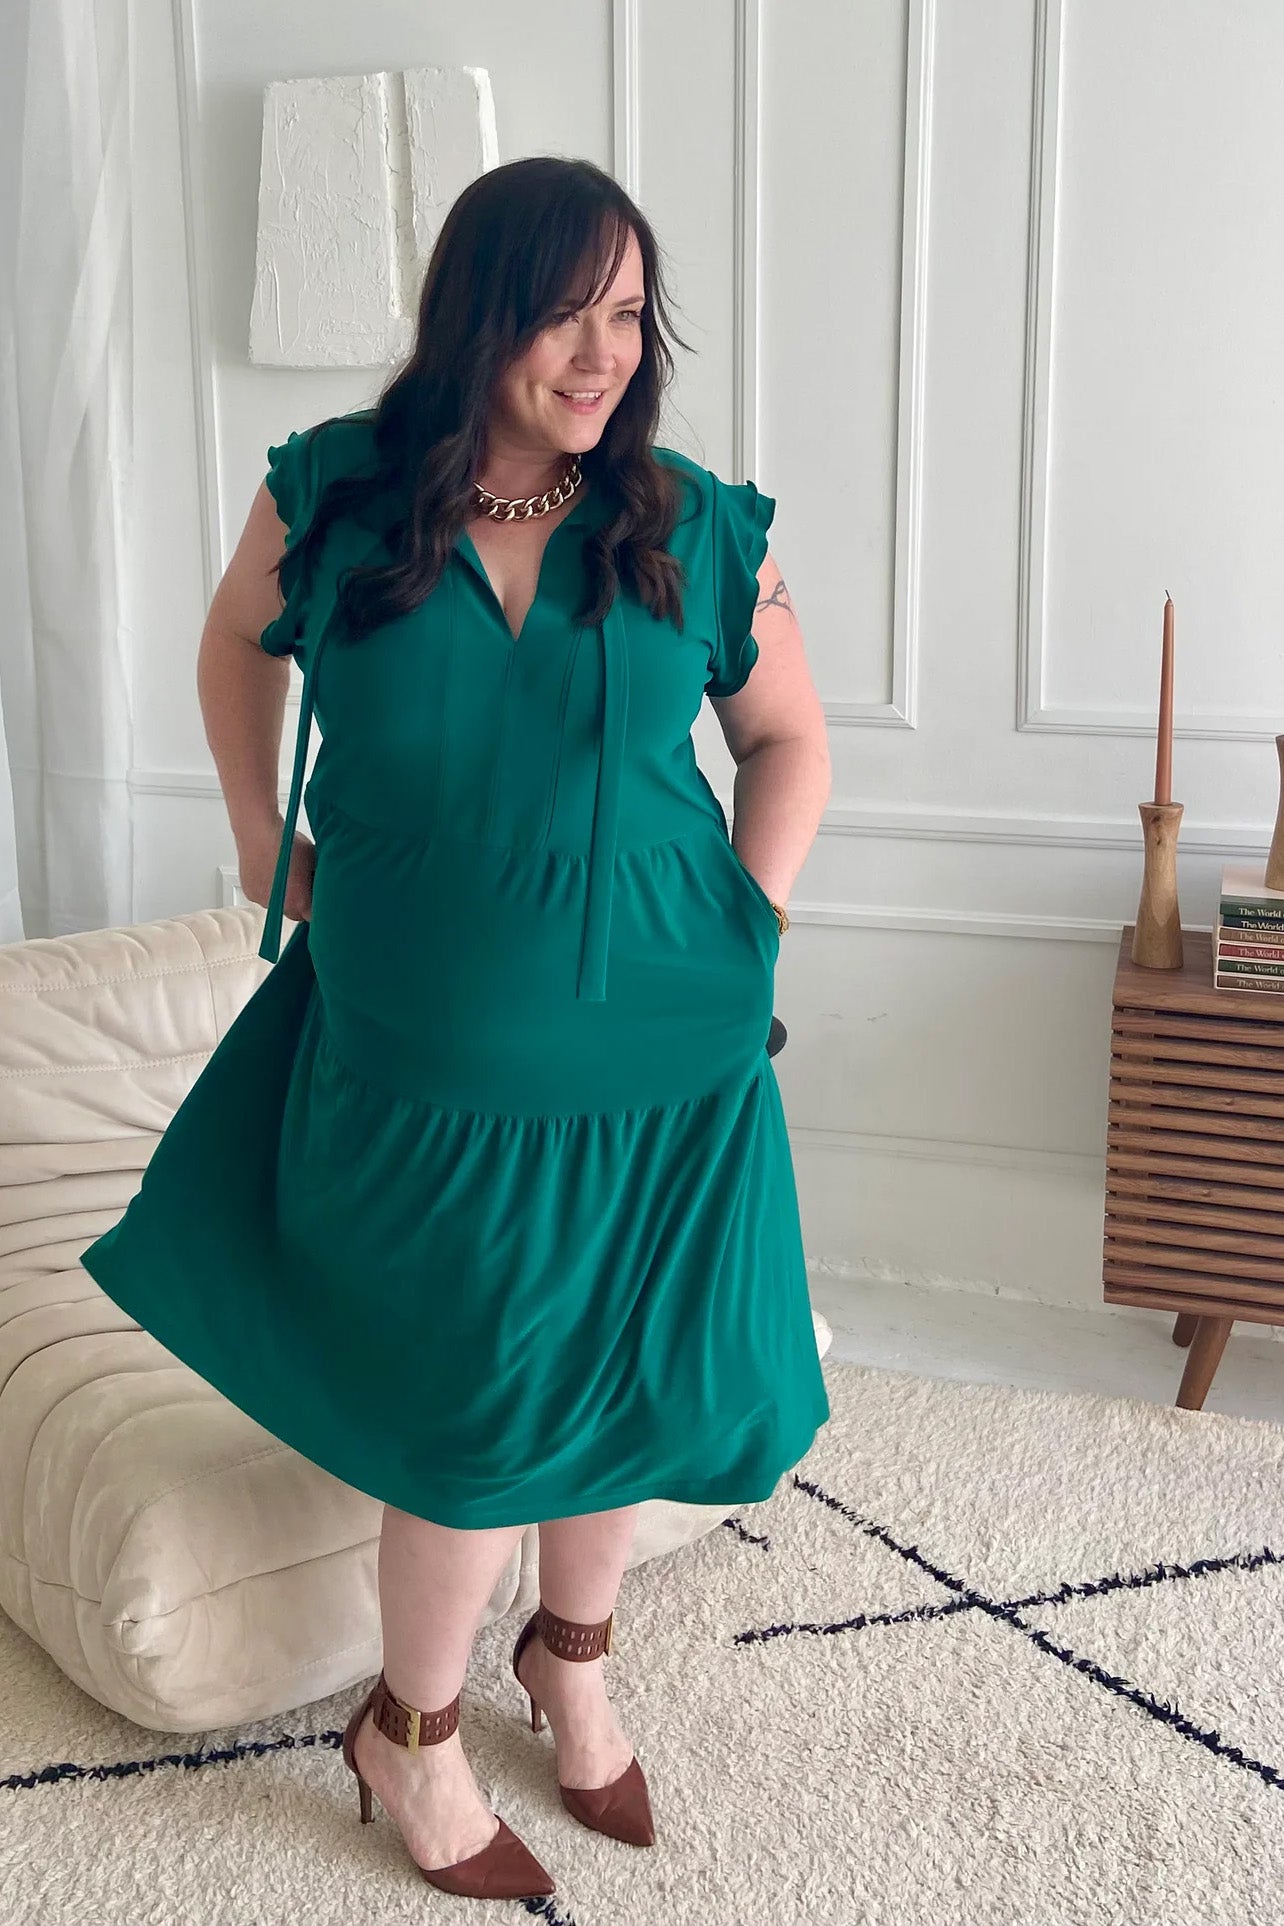 A woman twirling in the Ruffle Sleeve Tie Dress by Dotty, in emerald green, standing in front of a chair